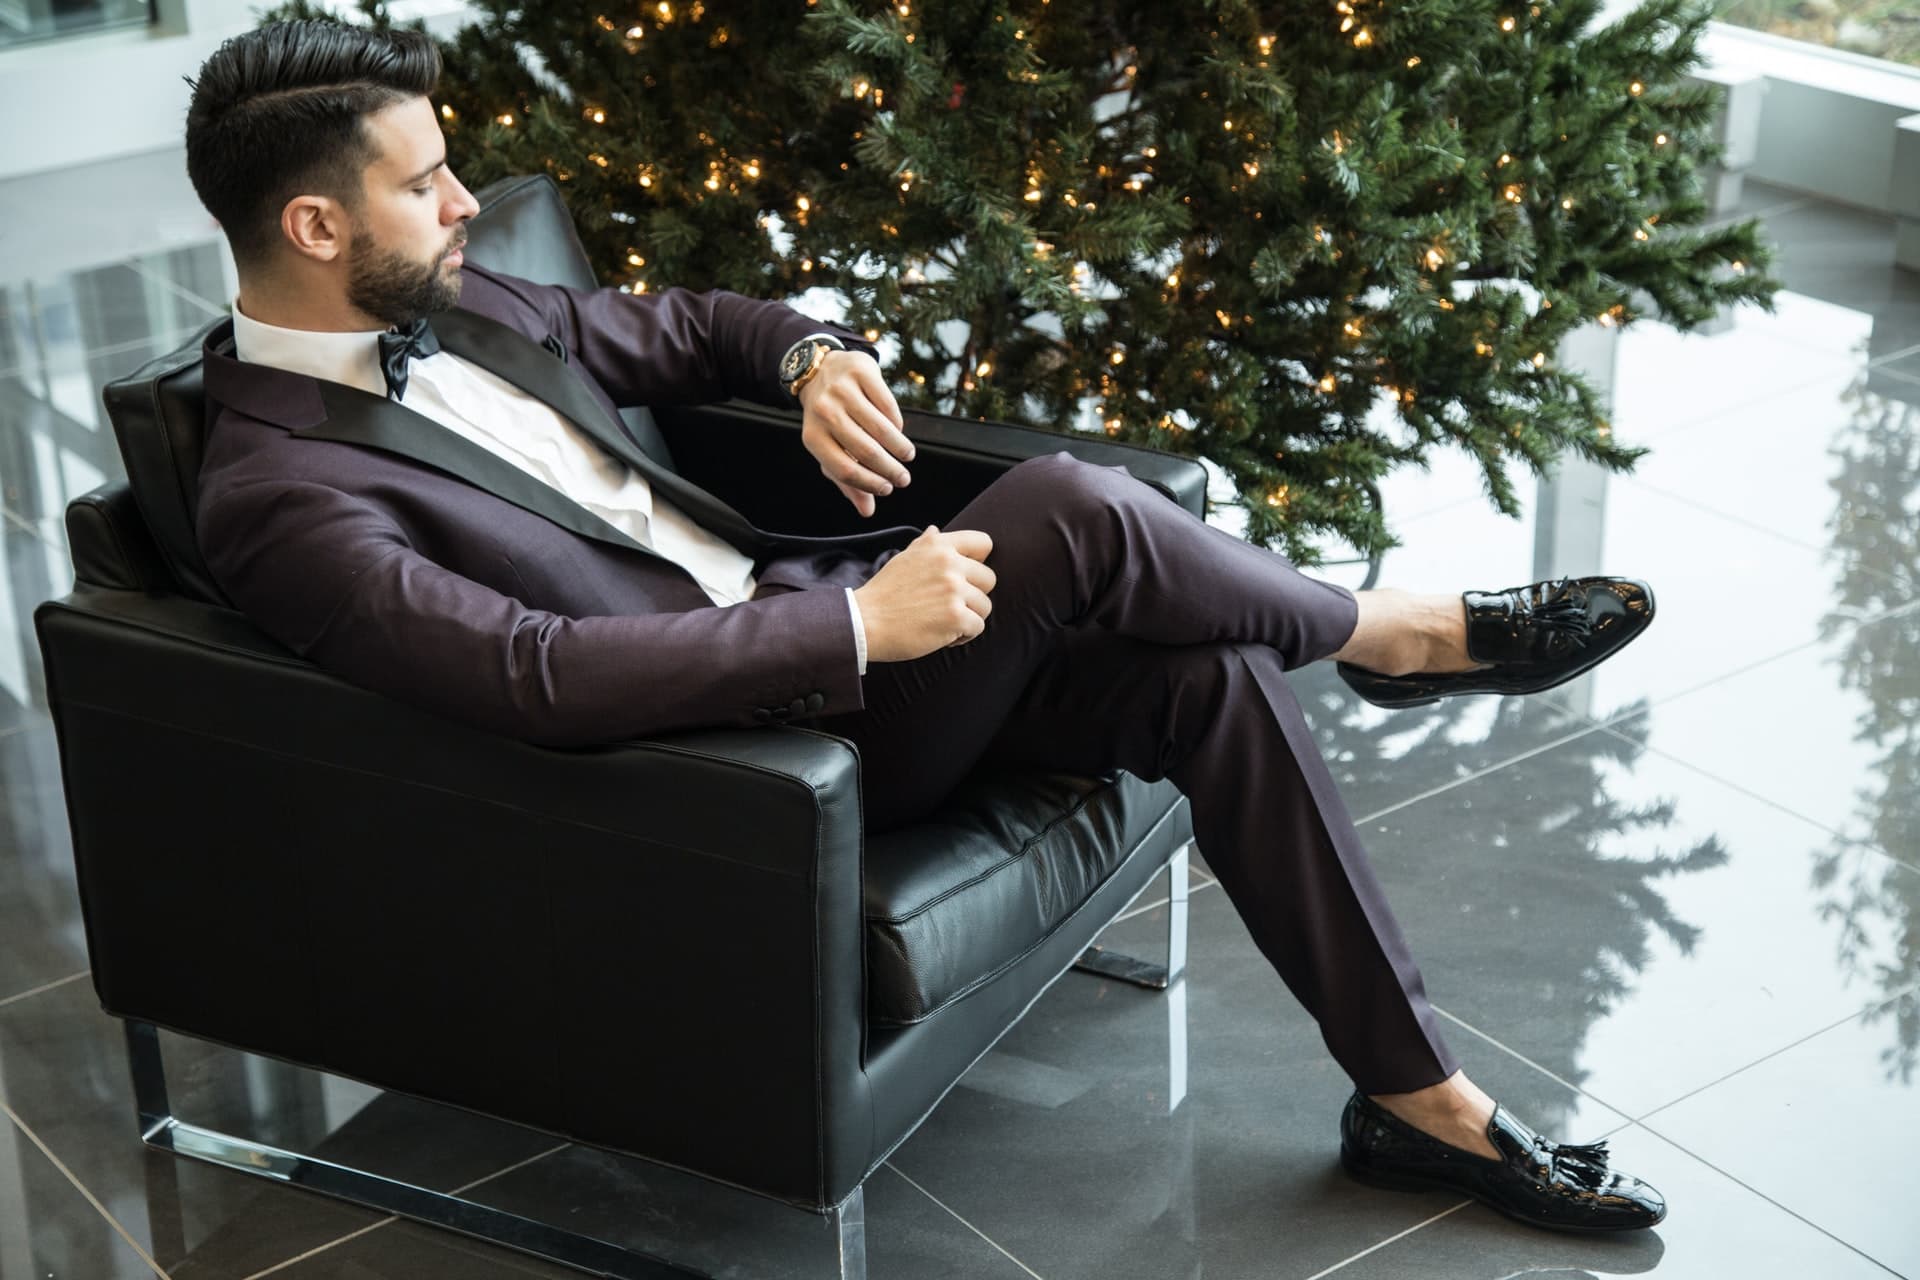 How to dress for the holidays? See our suggestions